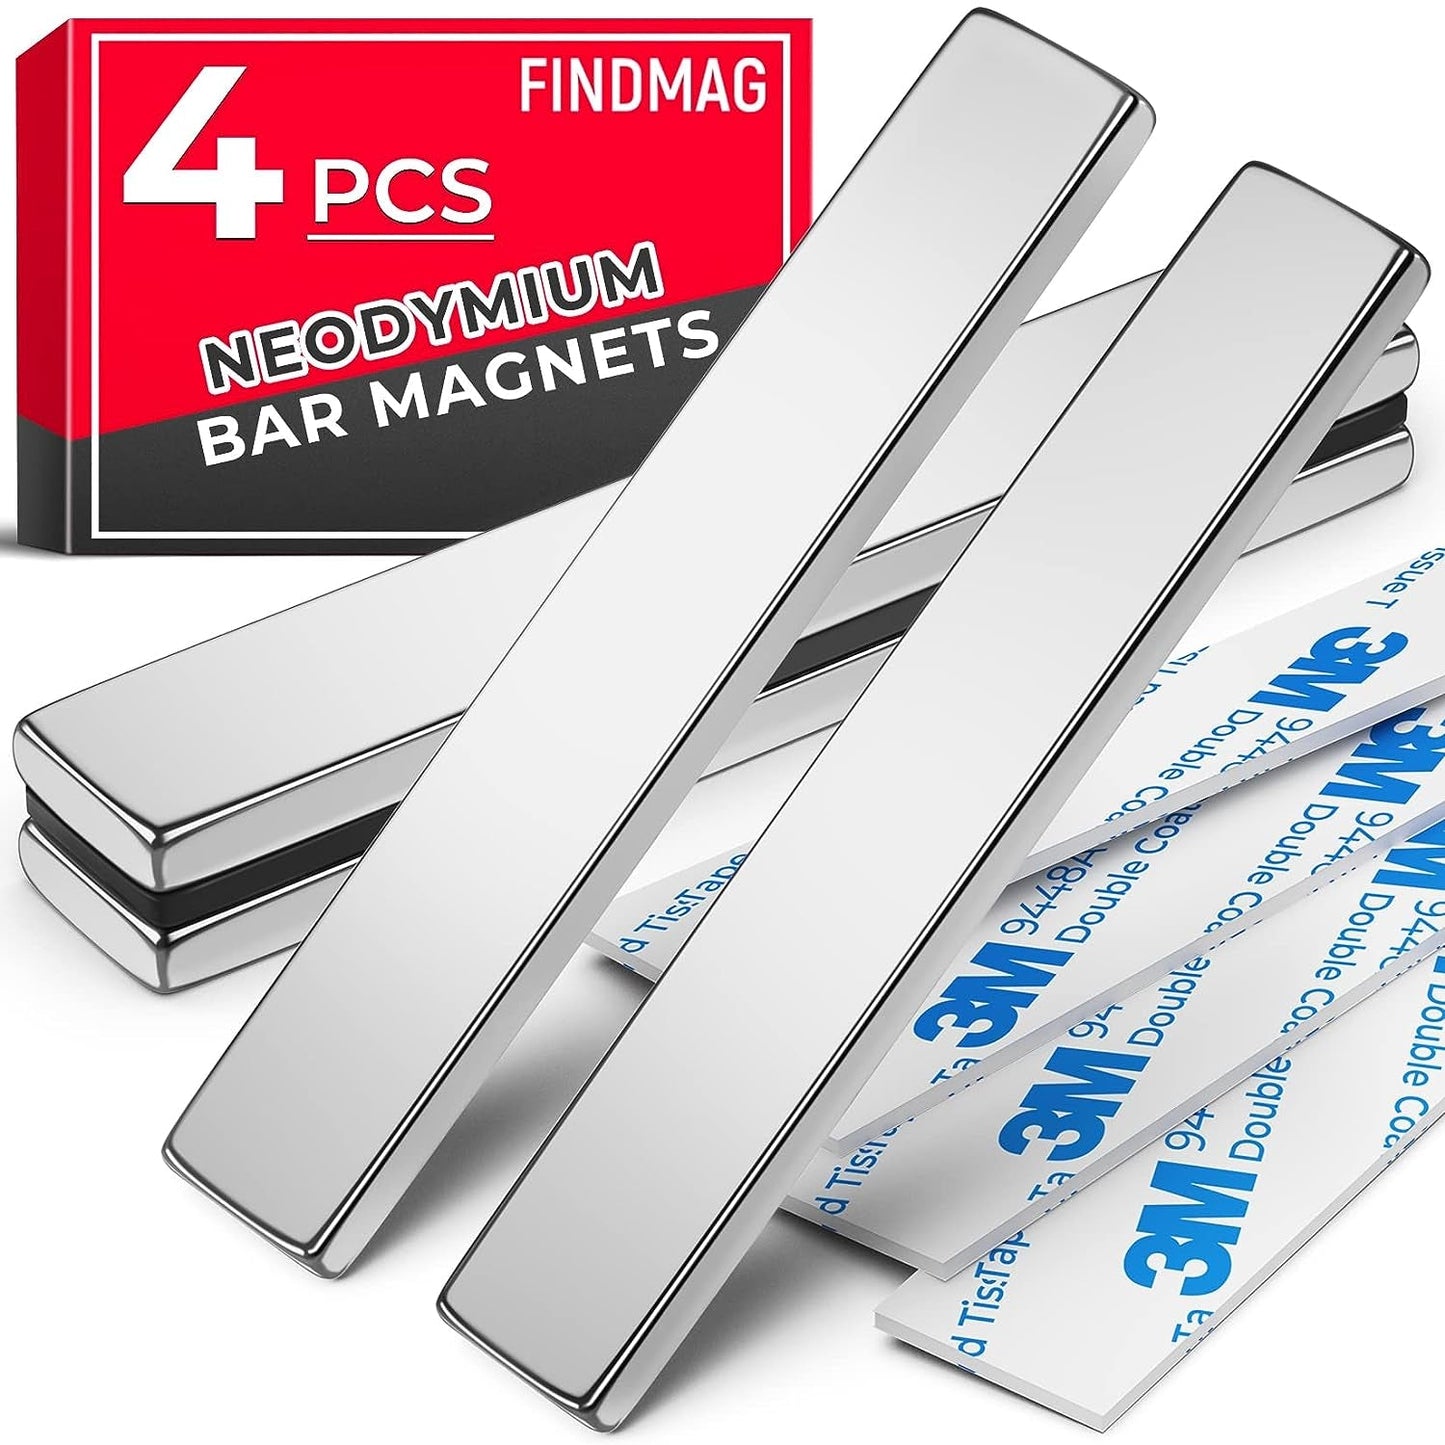 FINDMAG 6 Pack Powerful Neodymium Bar Magnets Rare Earth Magnet Bar, Strong Bar Magnets Neodymium Magnets with Double Sided Adhesive - 60 X 10 X 3 Mm